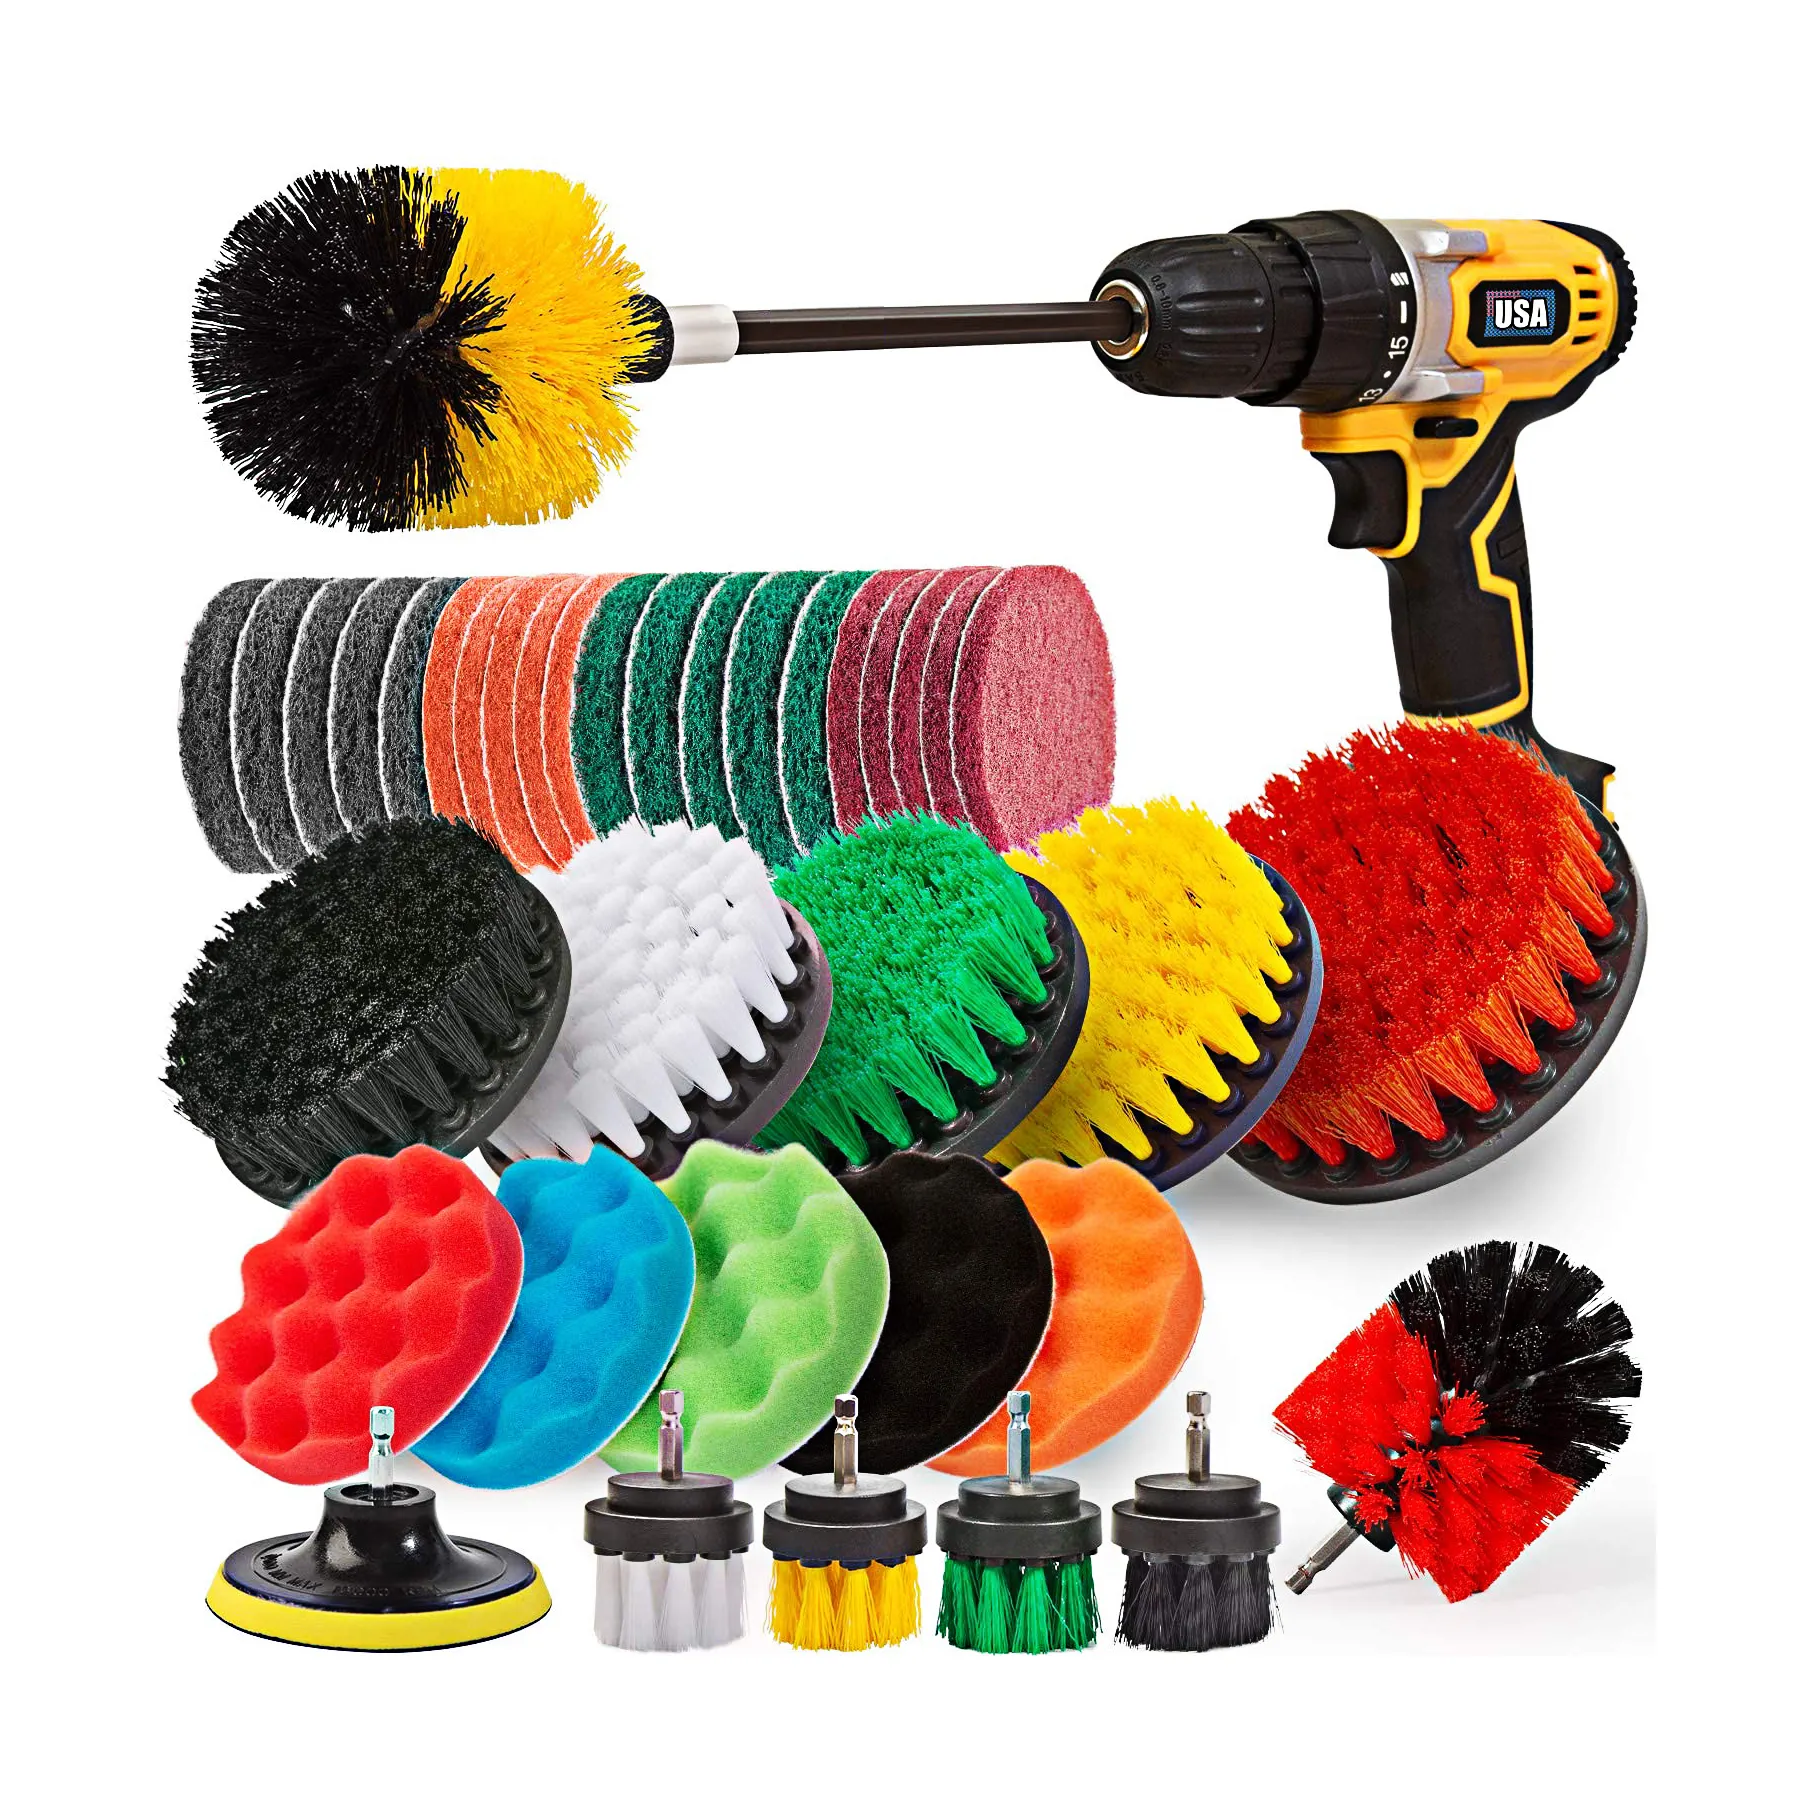 38 Pieces power scrubber attachments Cleaning Kit Drill Clean Brush set with Scrub pad for household Kitchen and Car